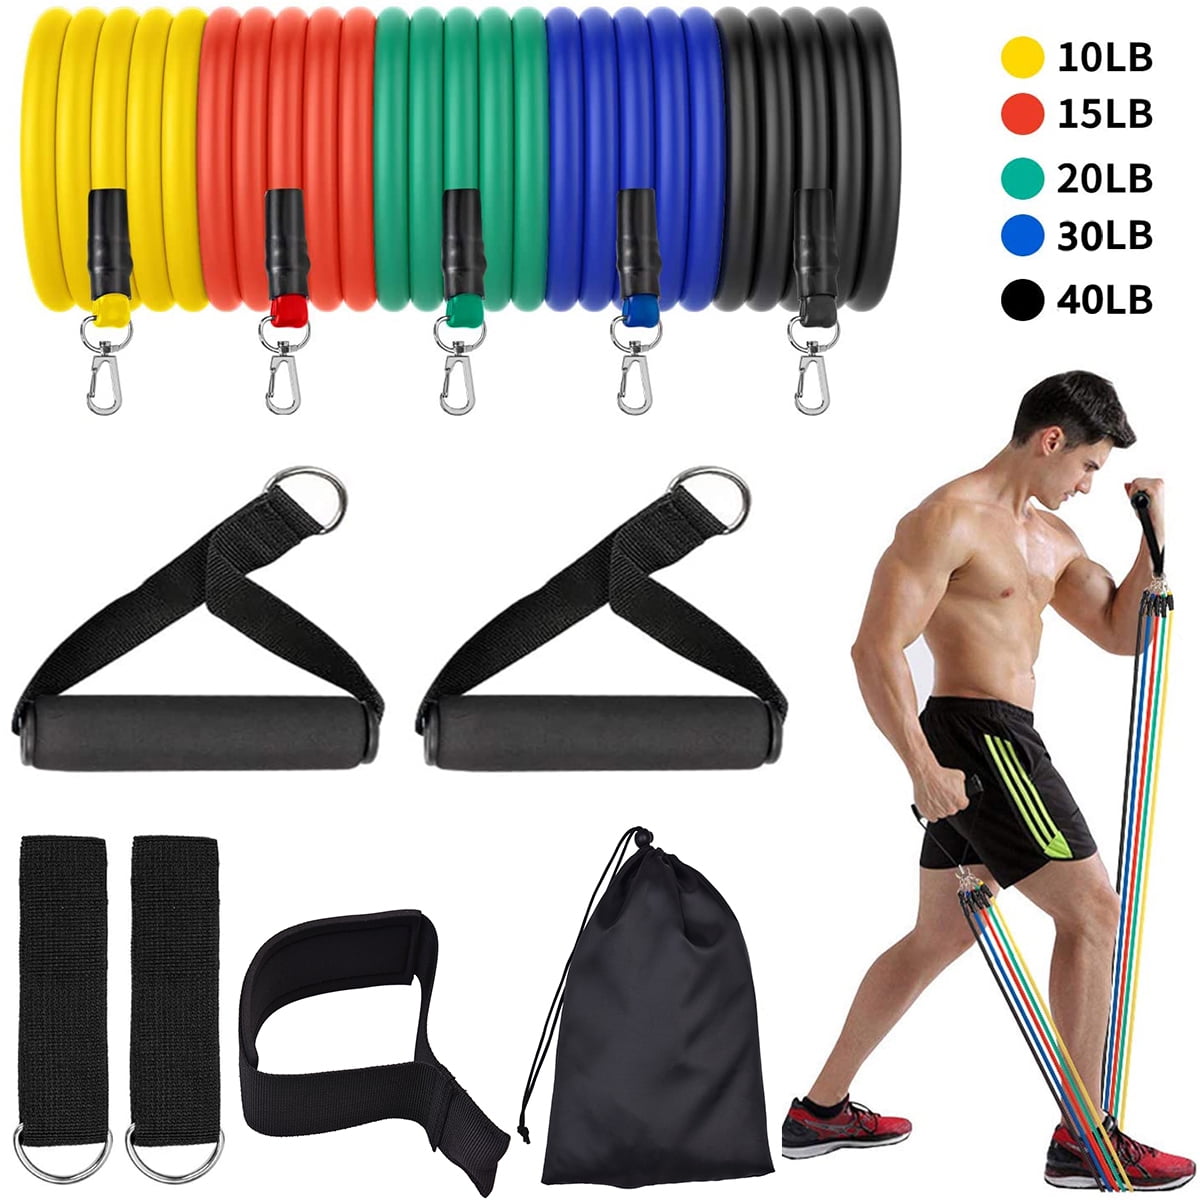 Exercise Resistance Bands Set with Handles,Exercise Workout Resistance Bands for Men Women with Handles,Door Anchor,Ankle Straps,Carrying Bag for Working Out,Fitness Training,Yoga 